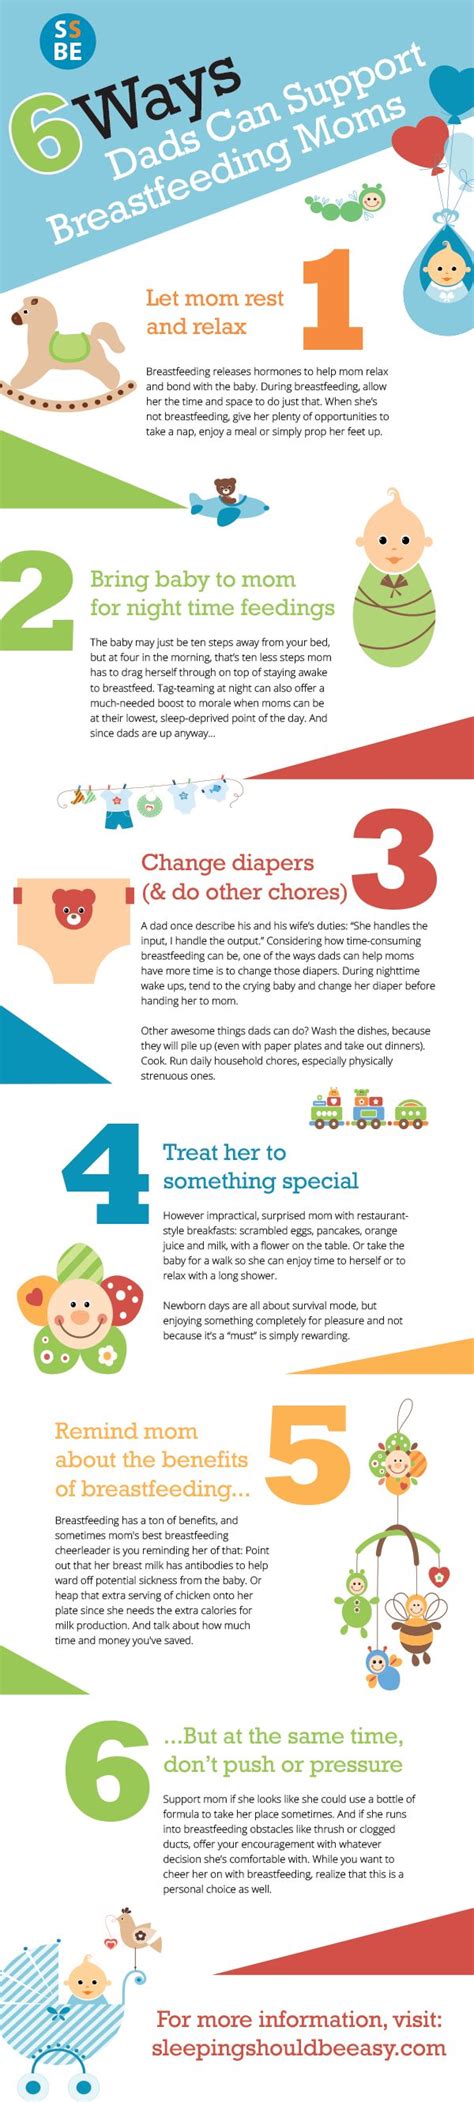 17 best images about breastfeeding on pinterest breastfeeding help milk supply and pumping